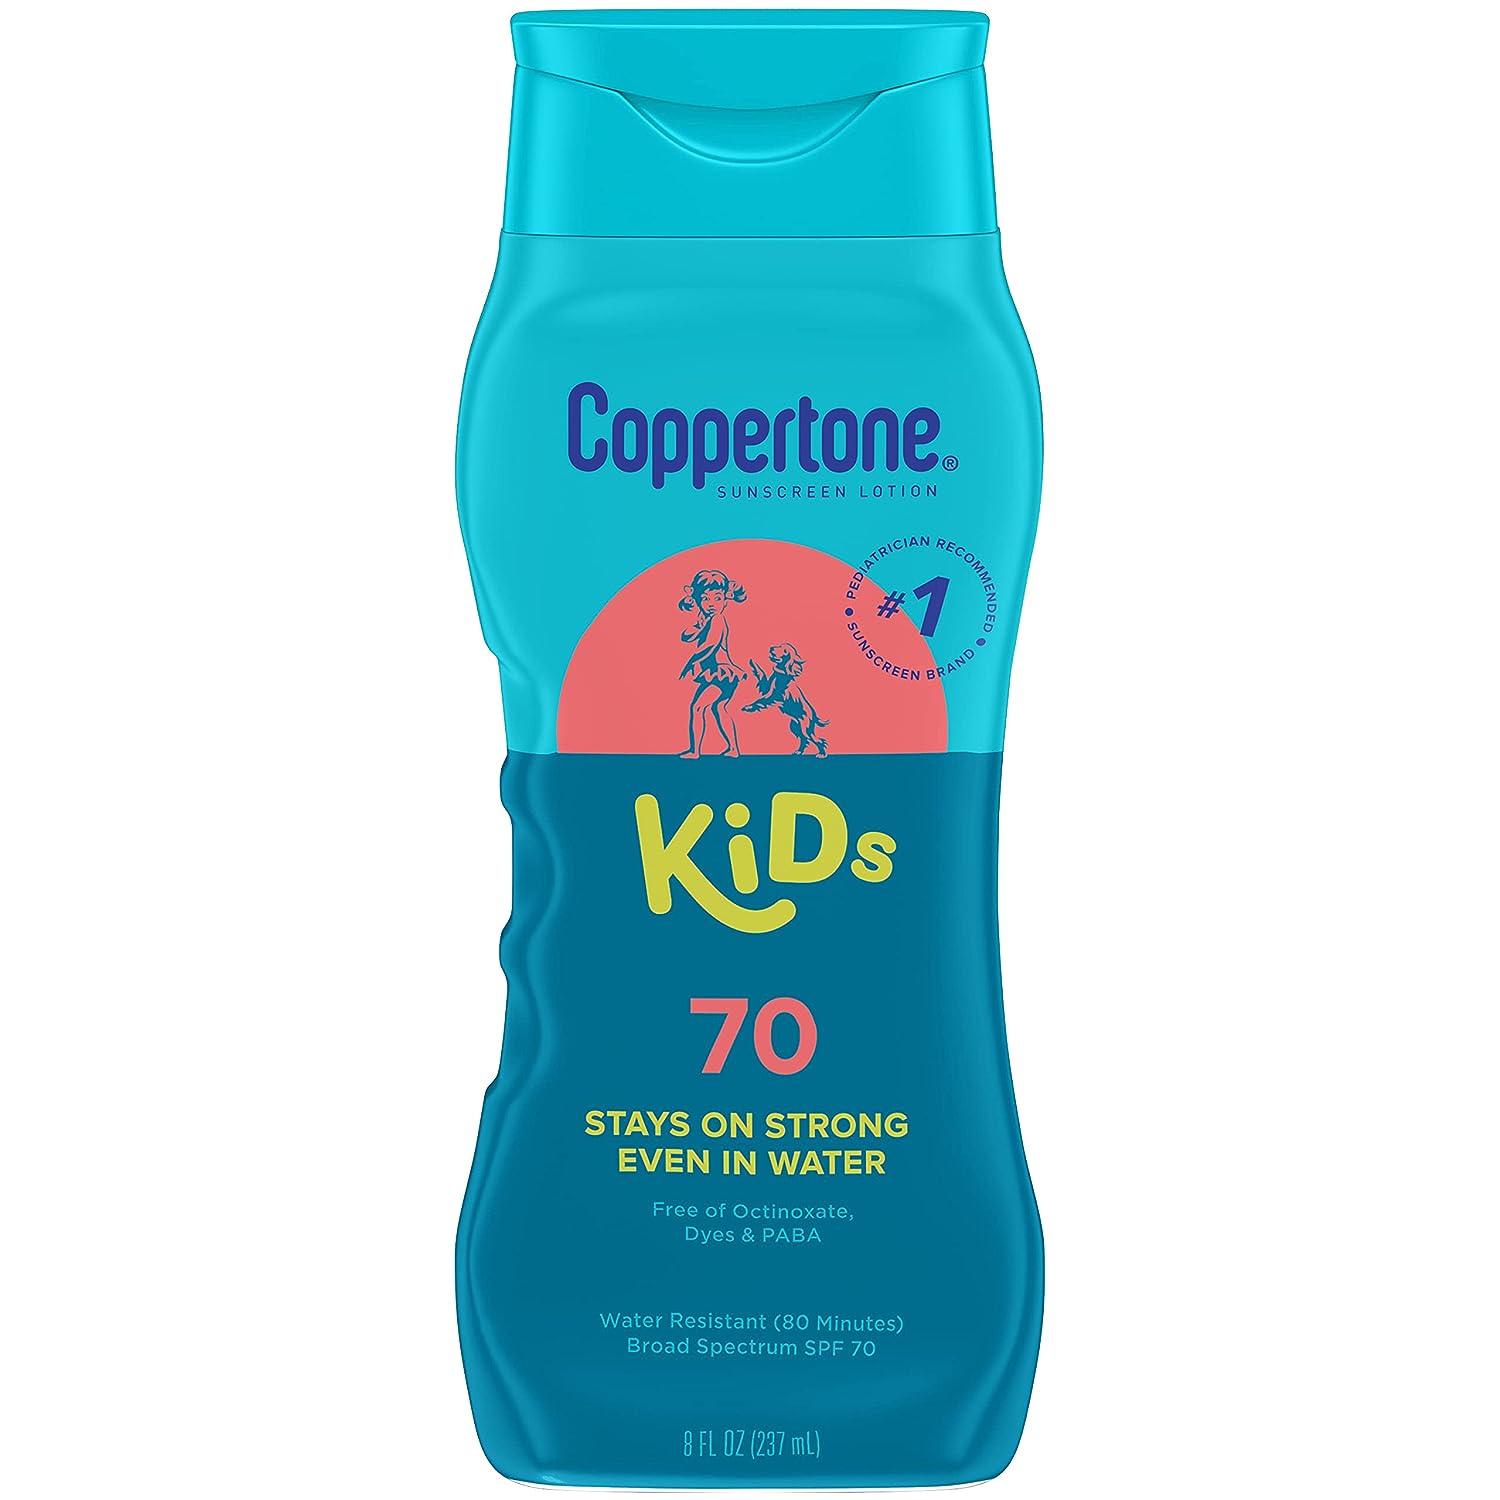 Coppertone SPF 70 Sunscreen Lotion for Kids